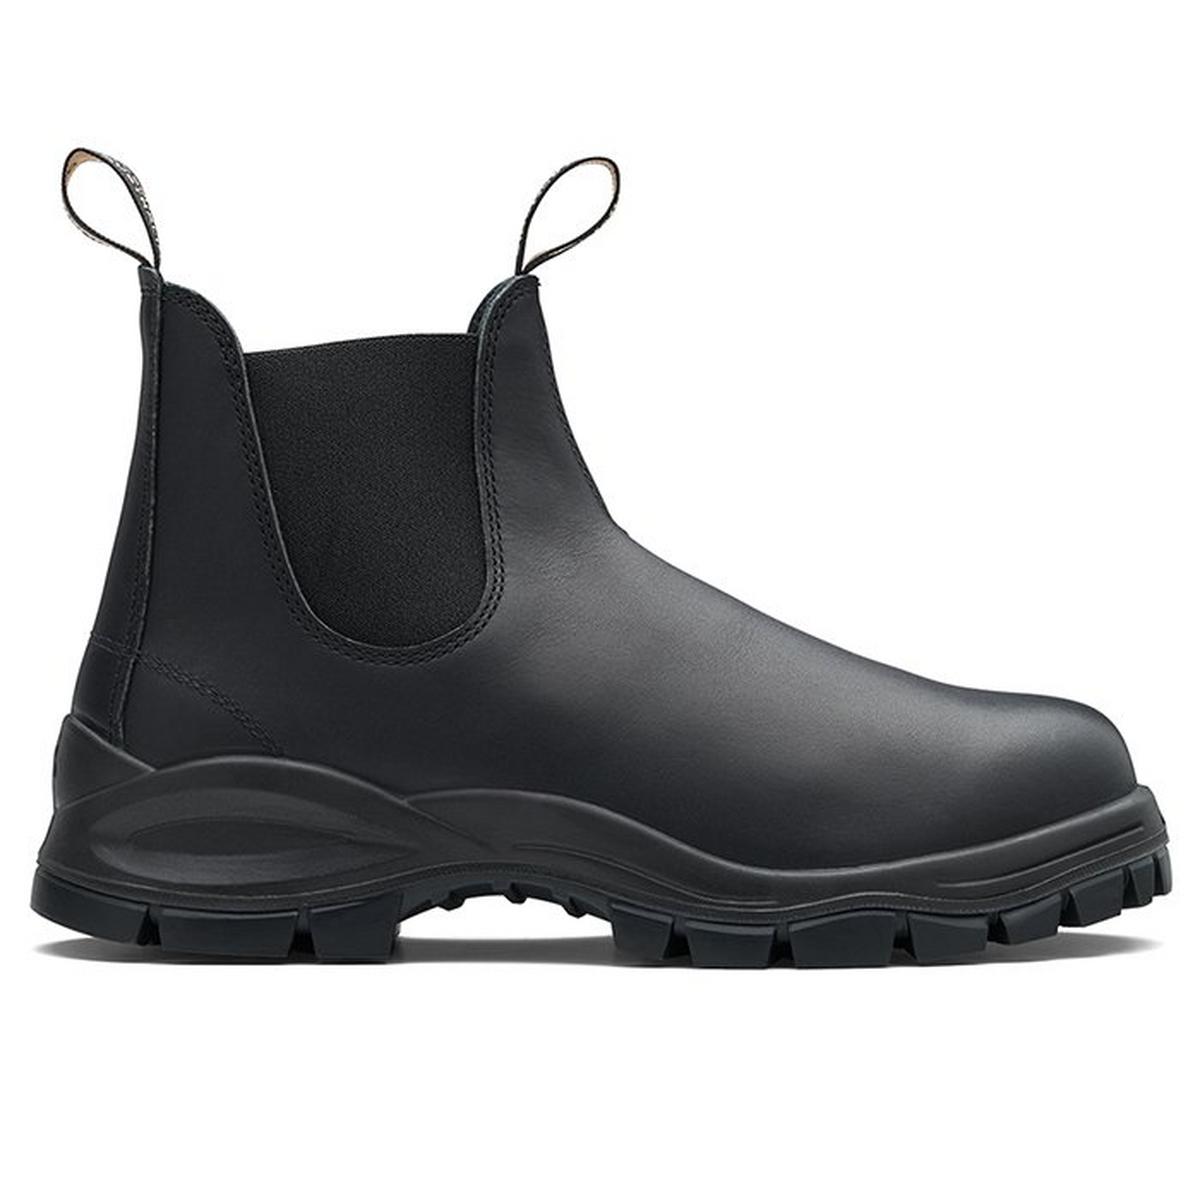 #2240 Lug Sole Boot in Black